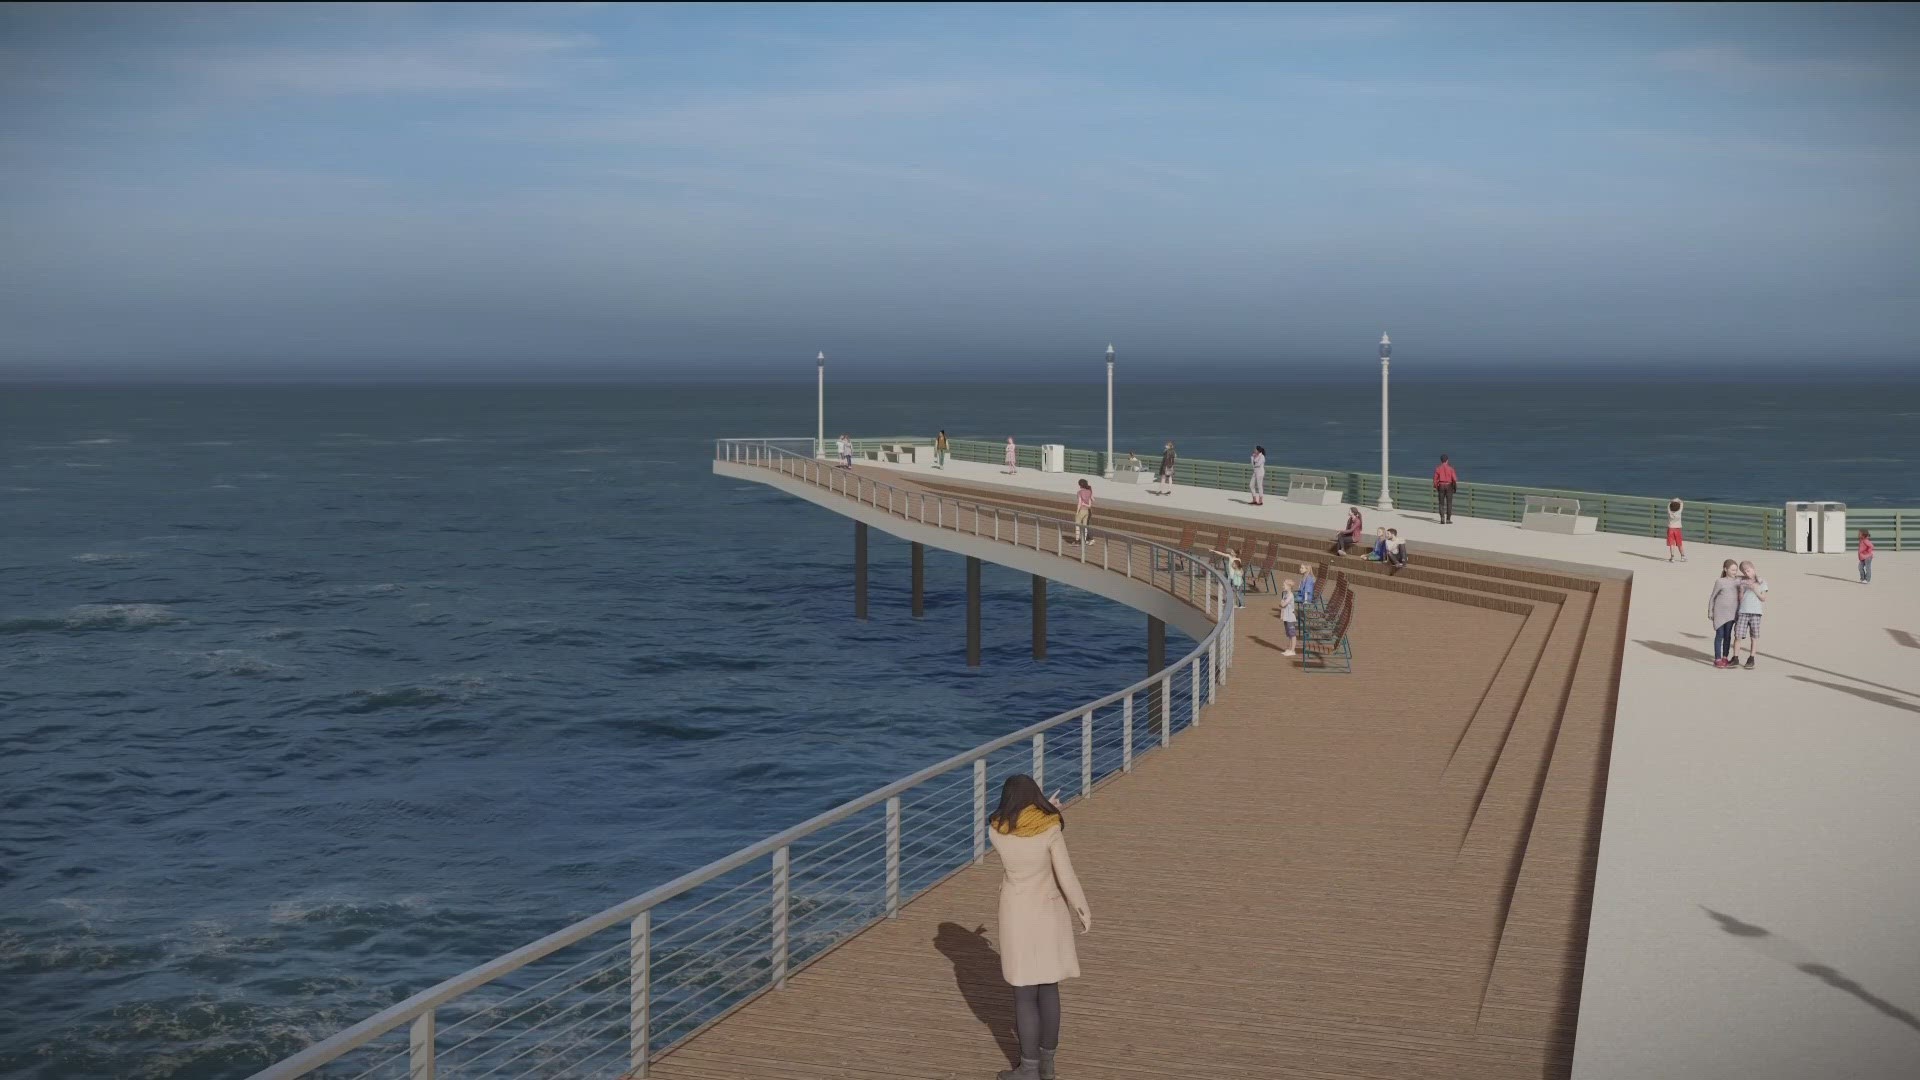 The City of San Diego is looking for community feedback on the preliminary concepts for replacement of the 57-year-old pier.